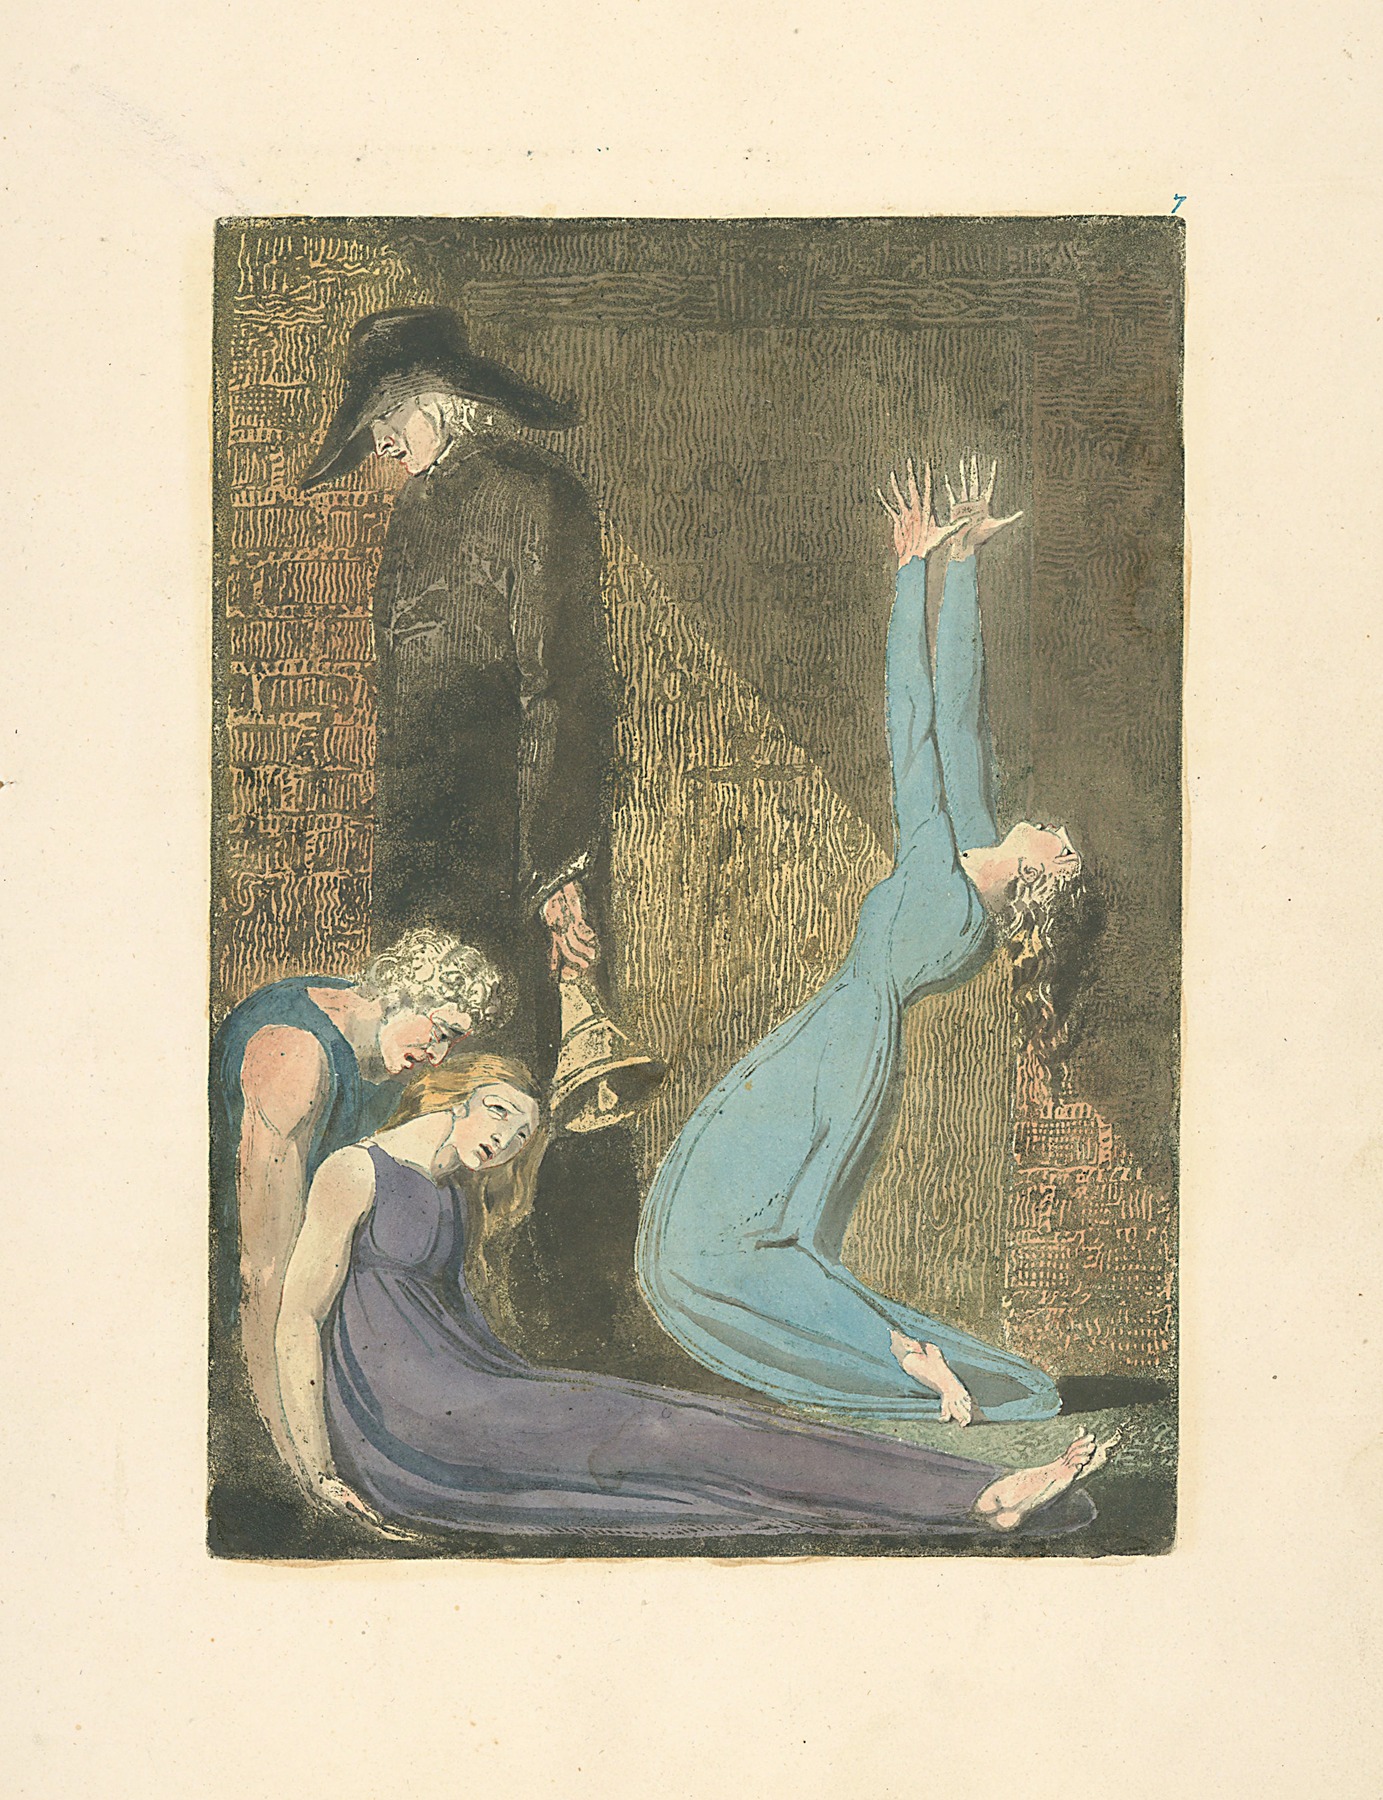 William Blake - Man supporting supine woman, aged man with bell, and woman in blue dress, arms raised in suppliction